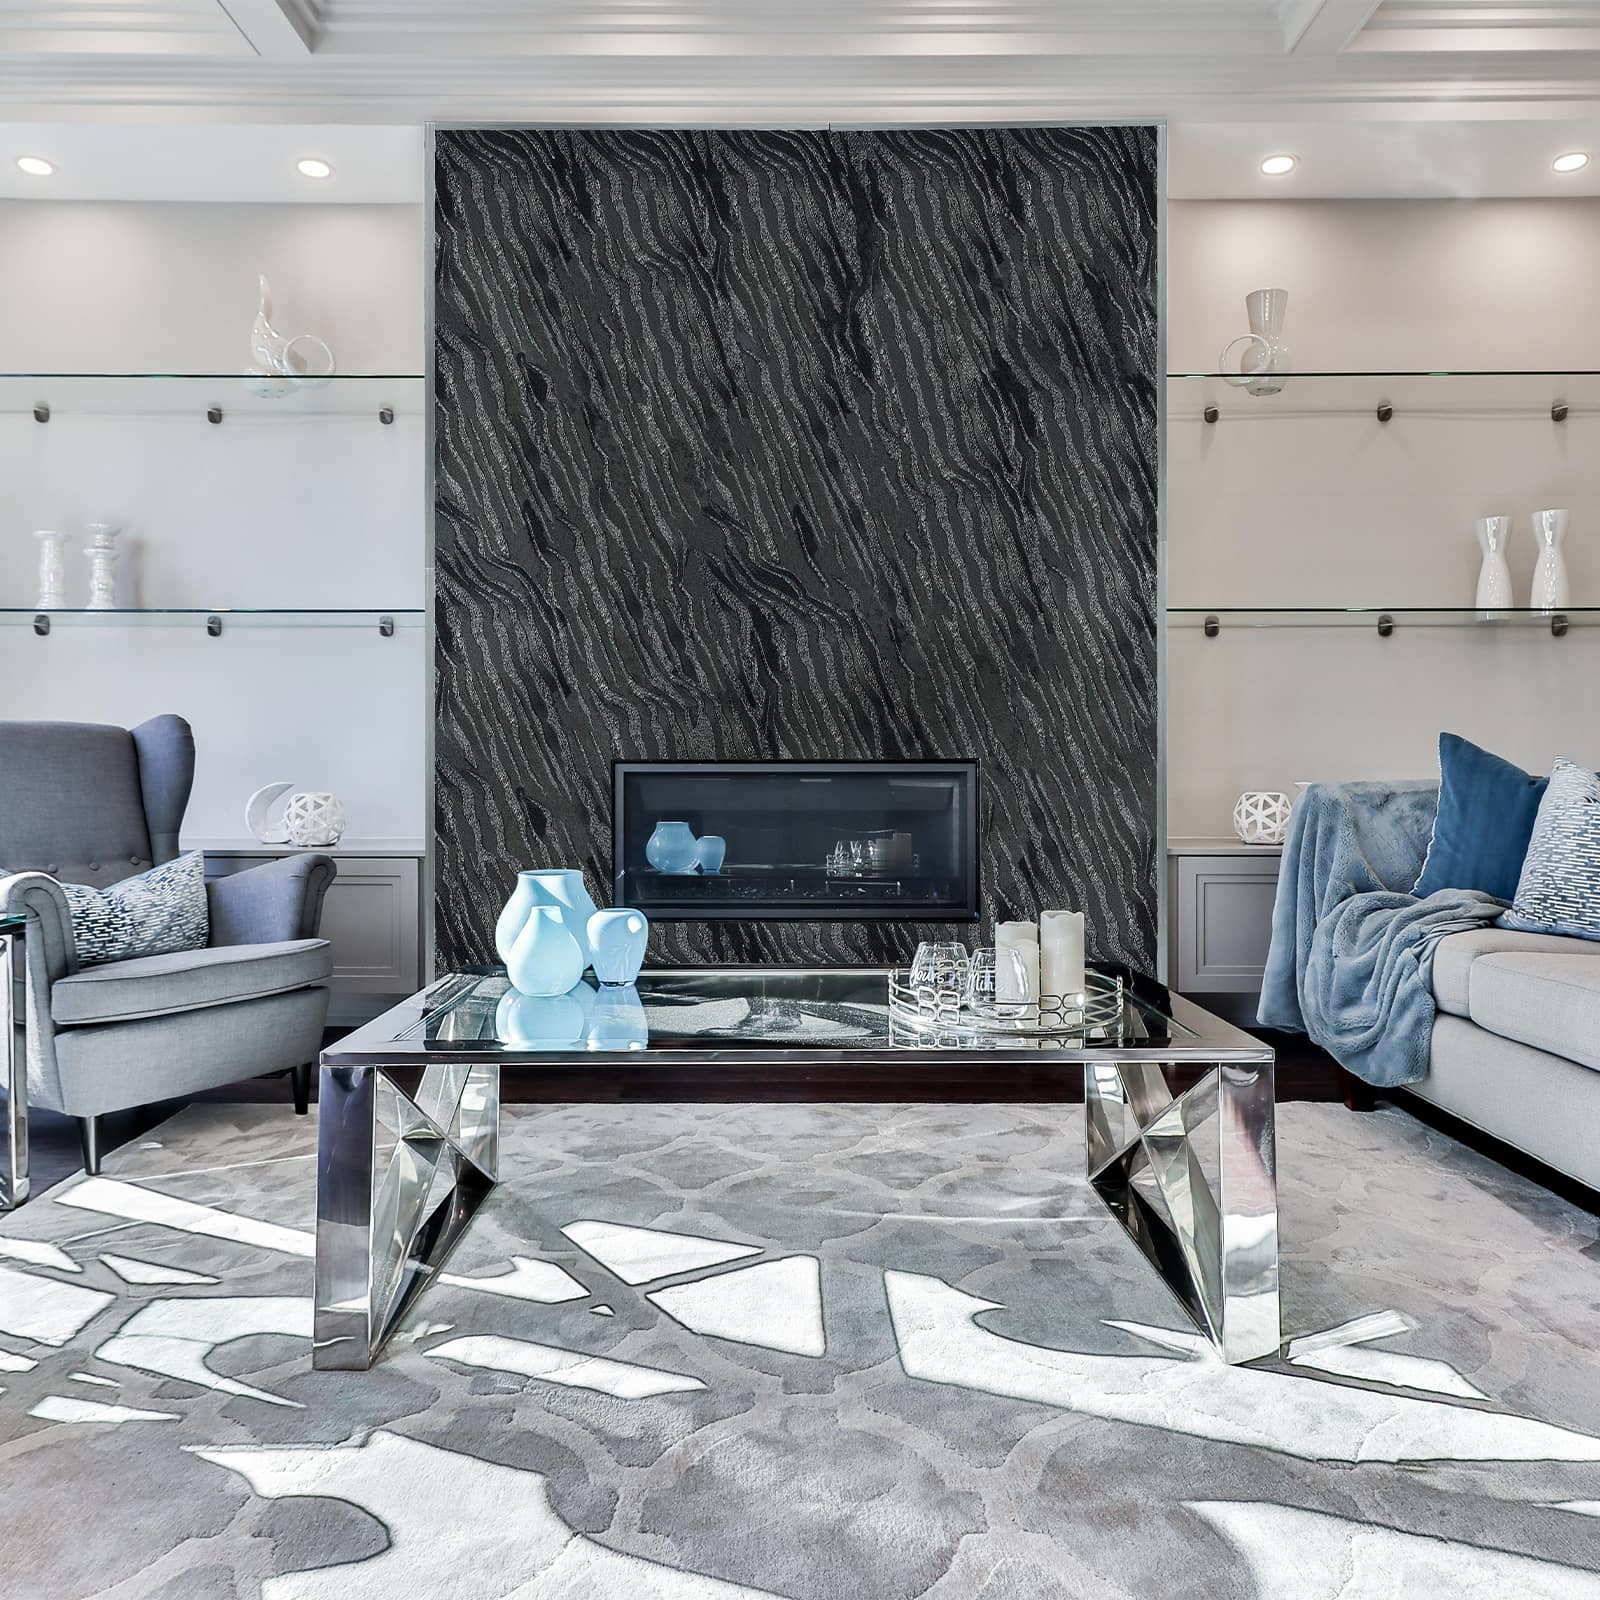 Arthylae-fireplace-silver-zebre-glass-architectural-panel